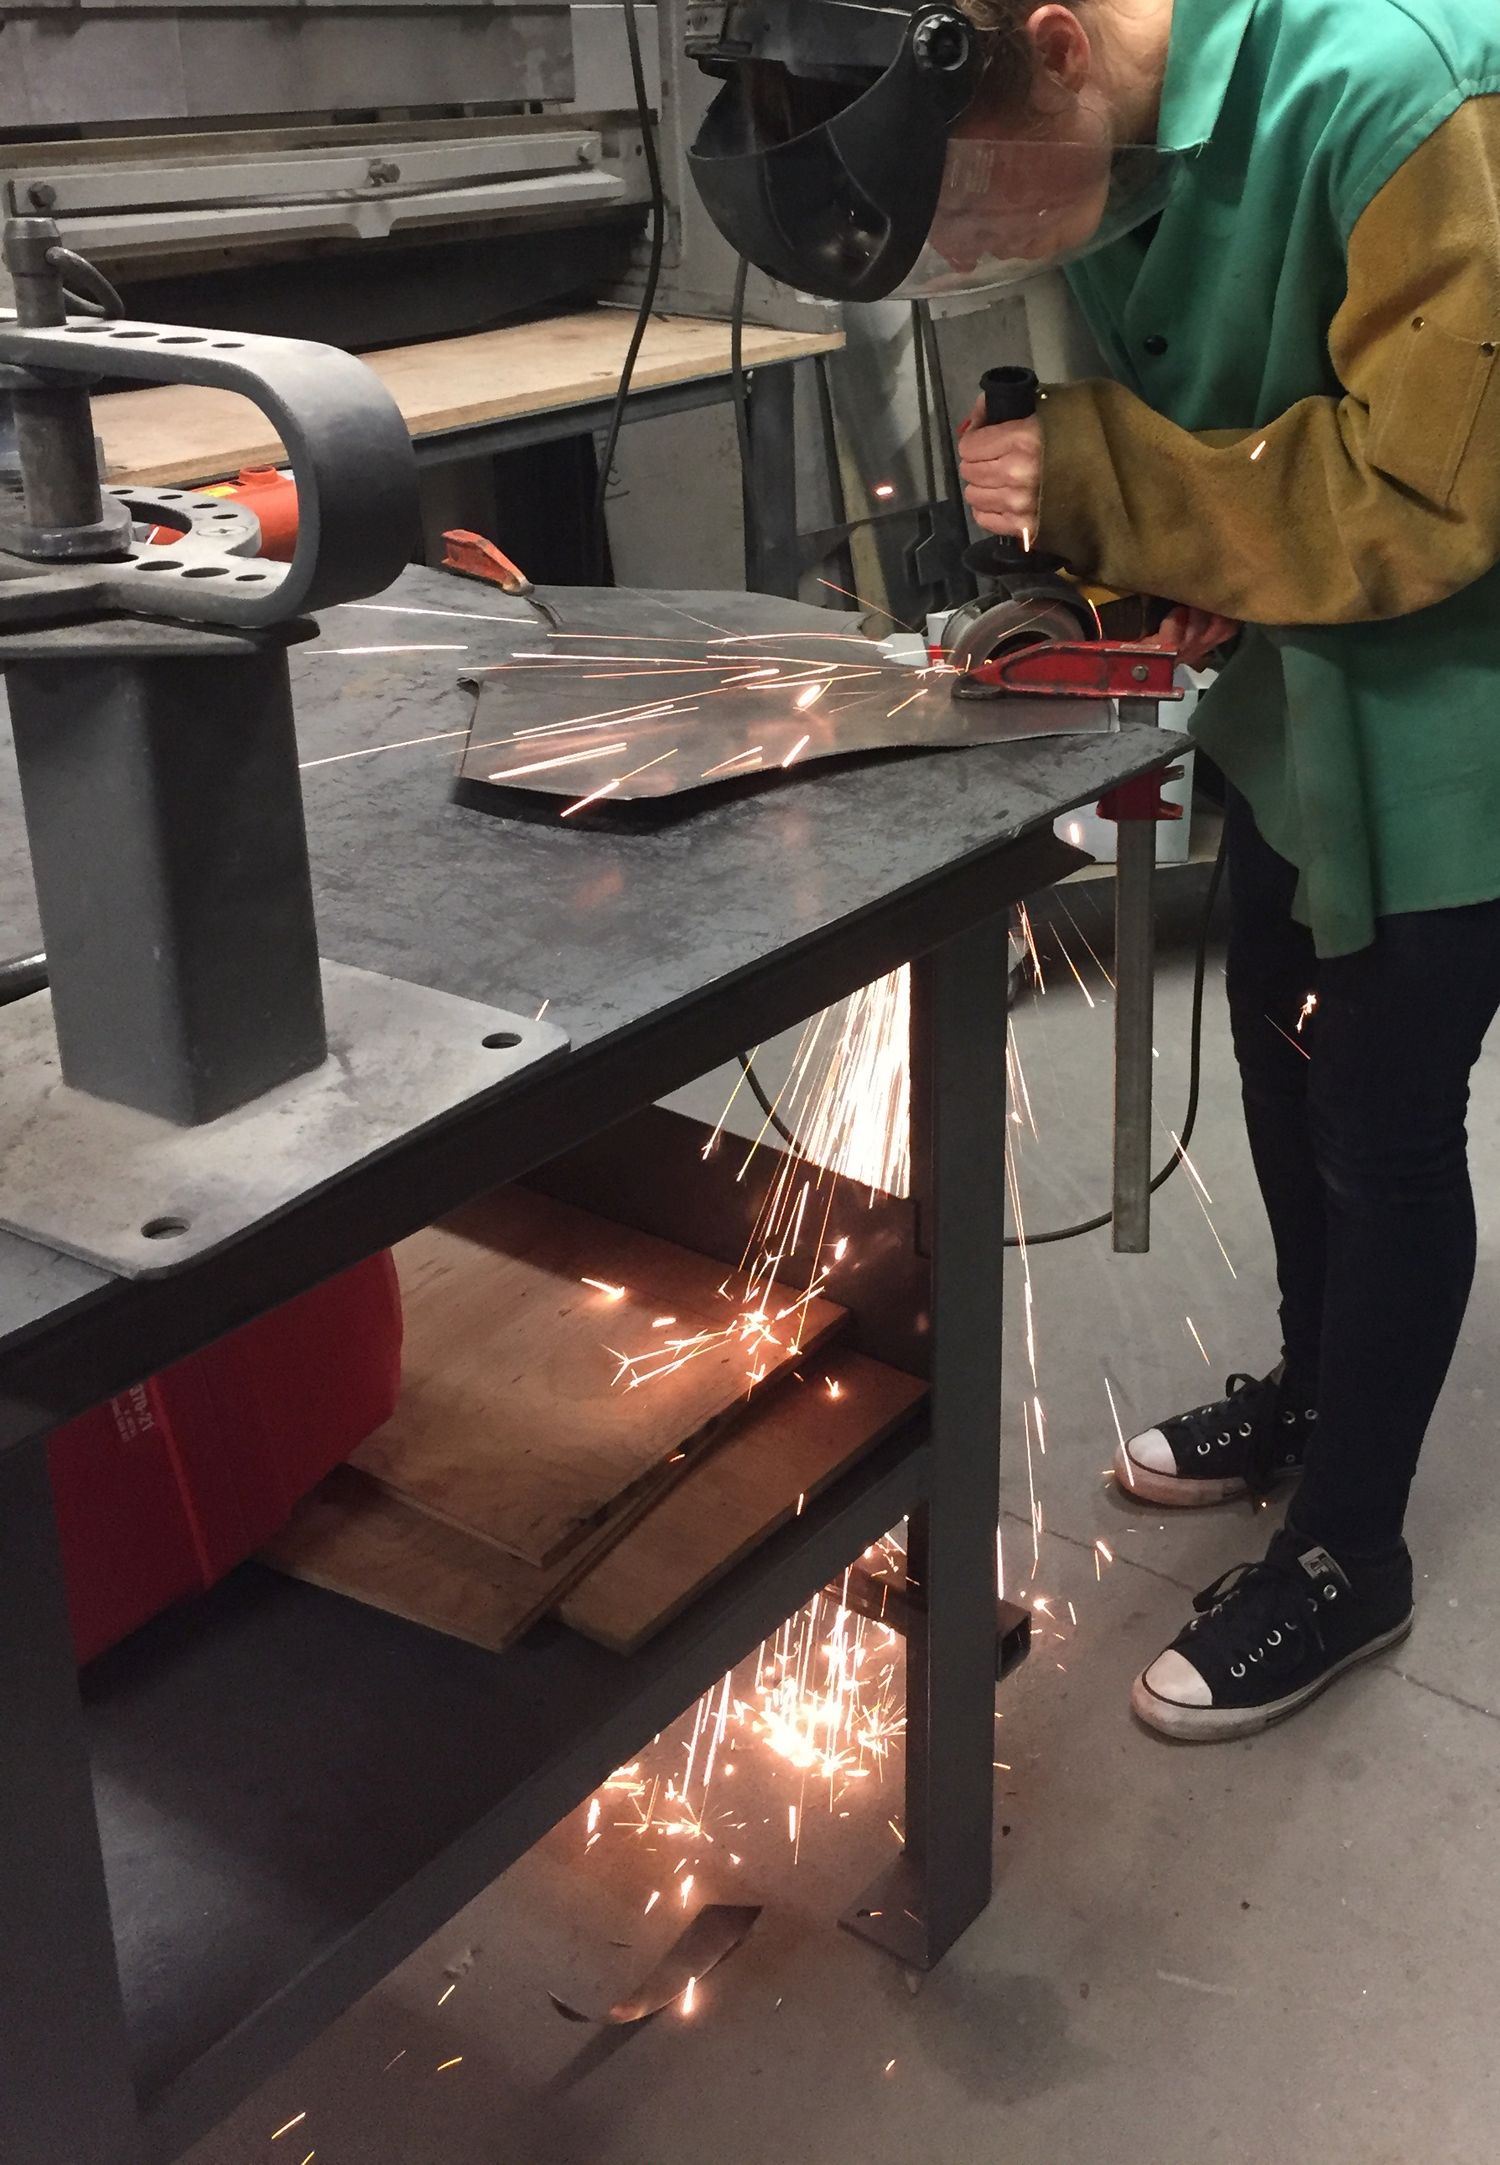 Female bent over a table with a tool that is generating sparks